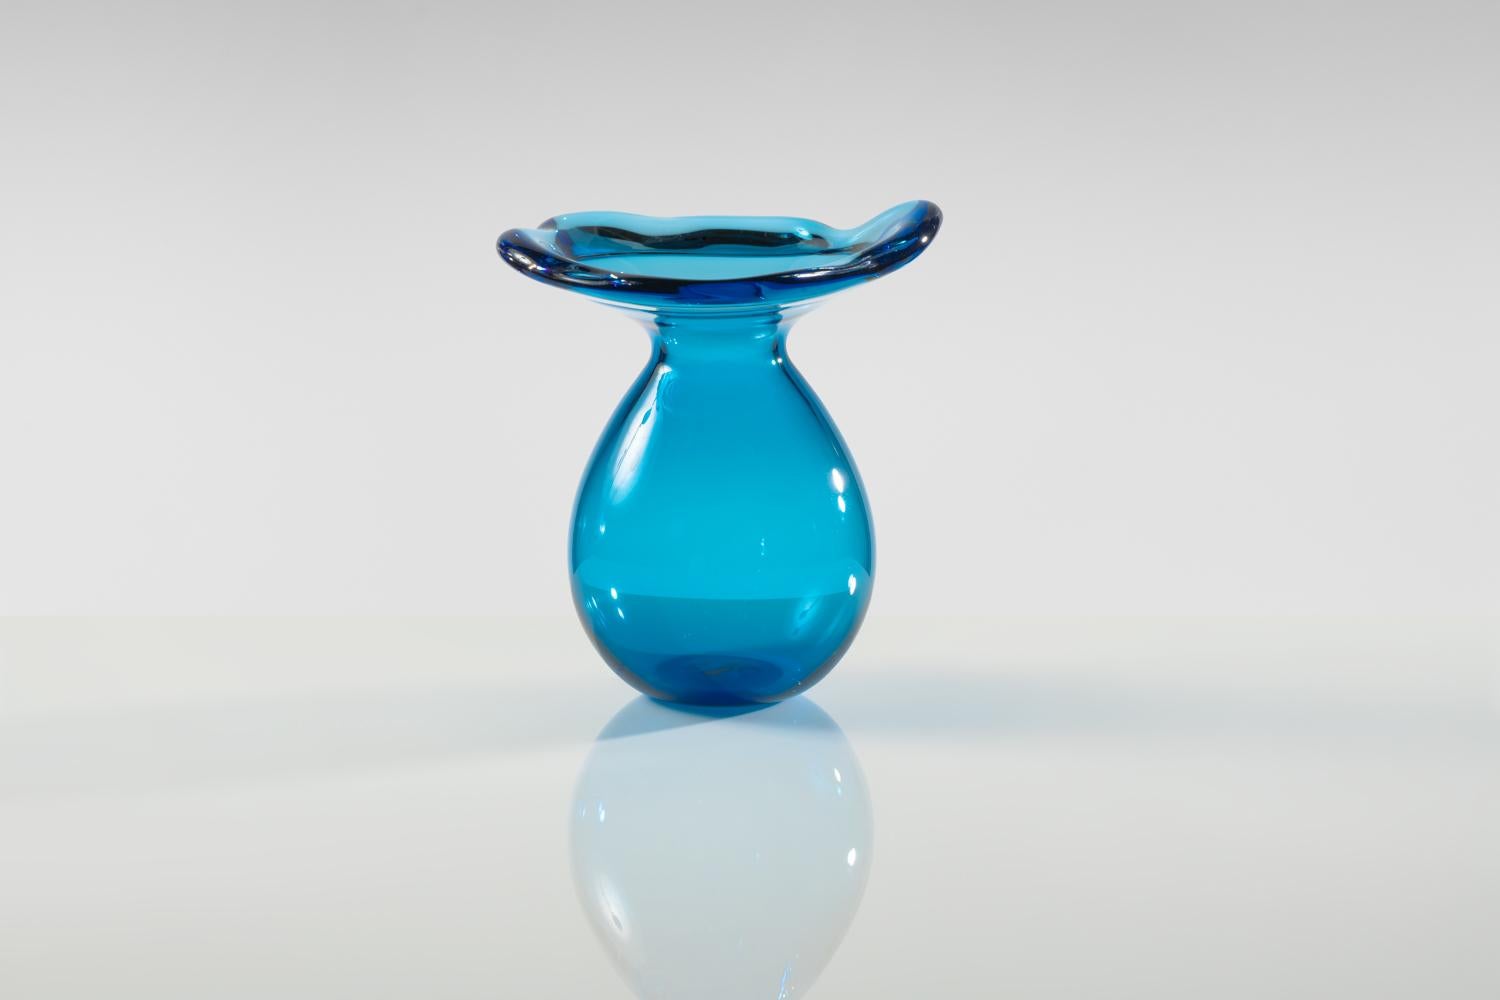 Hand-blown glass design by Kazuki Takizawa. Individually, crafted at KT Glassworks in Los Angeles, California. Each Shizuku (which means water droplet in Japanese) round vase is spun out using centrifugal force and the glass's natural ability to